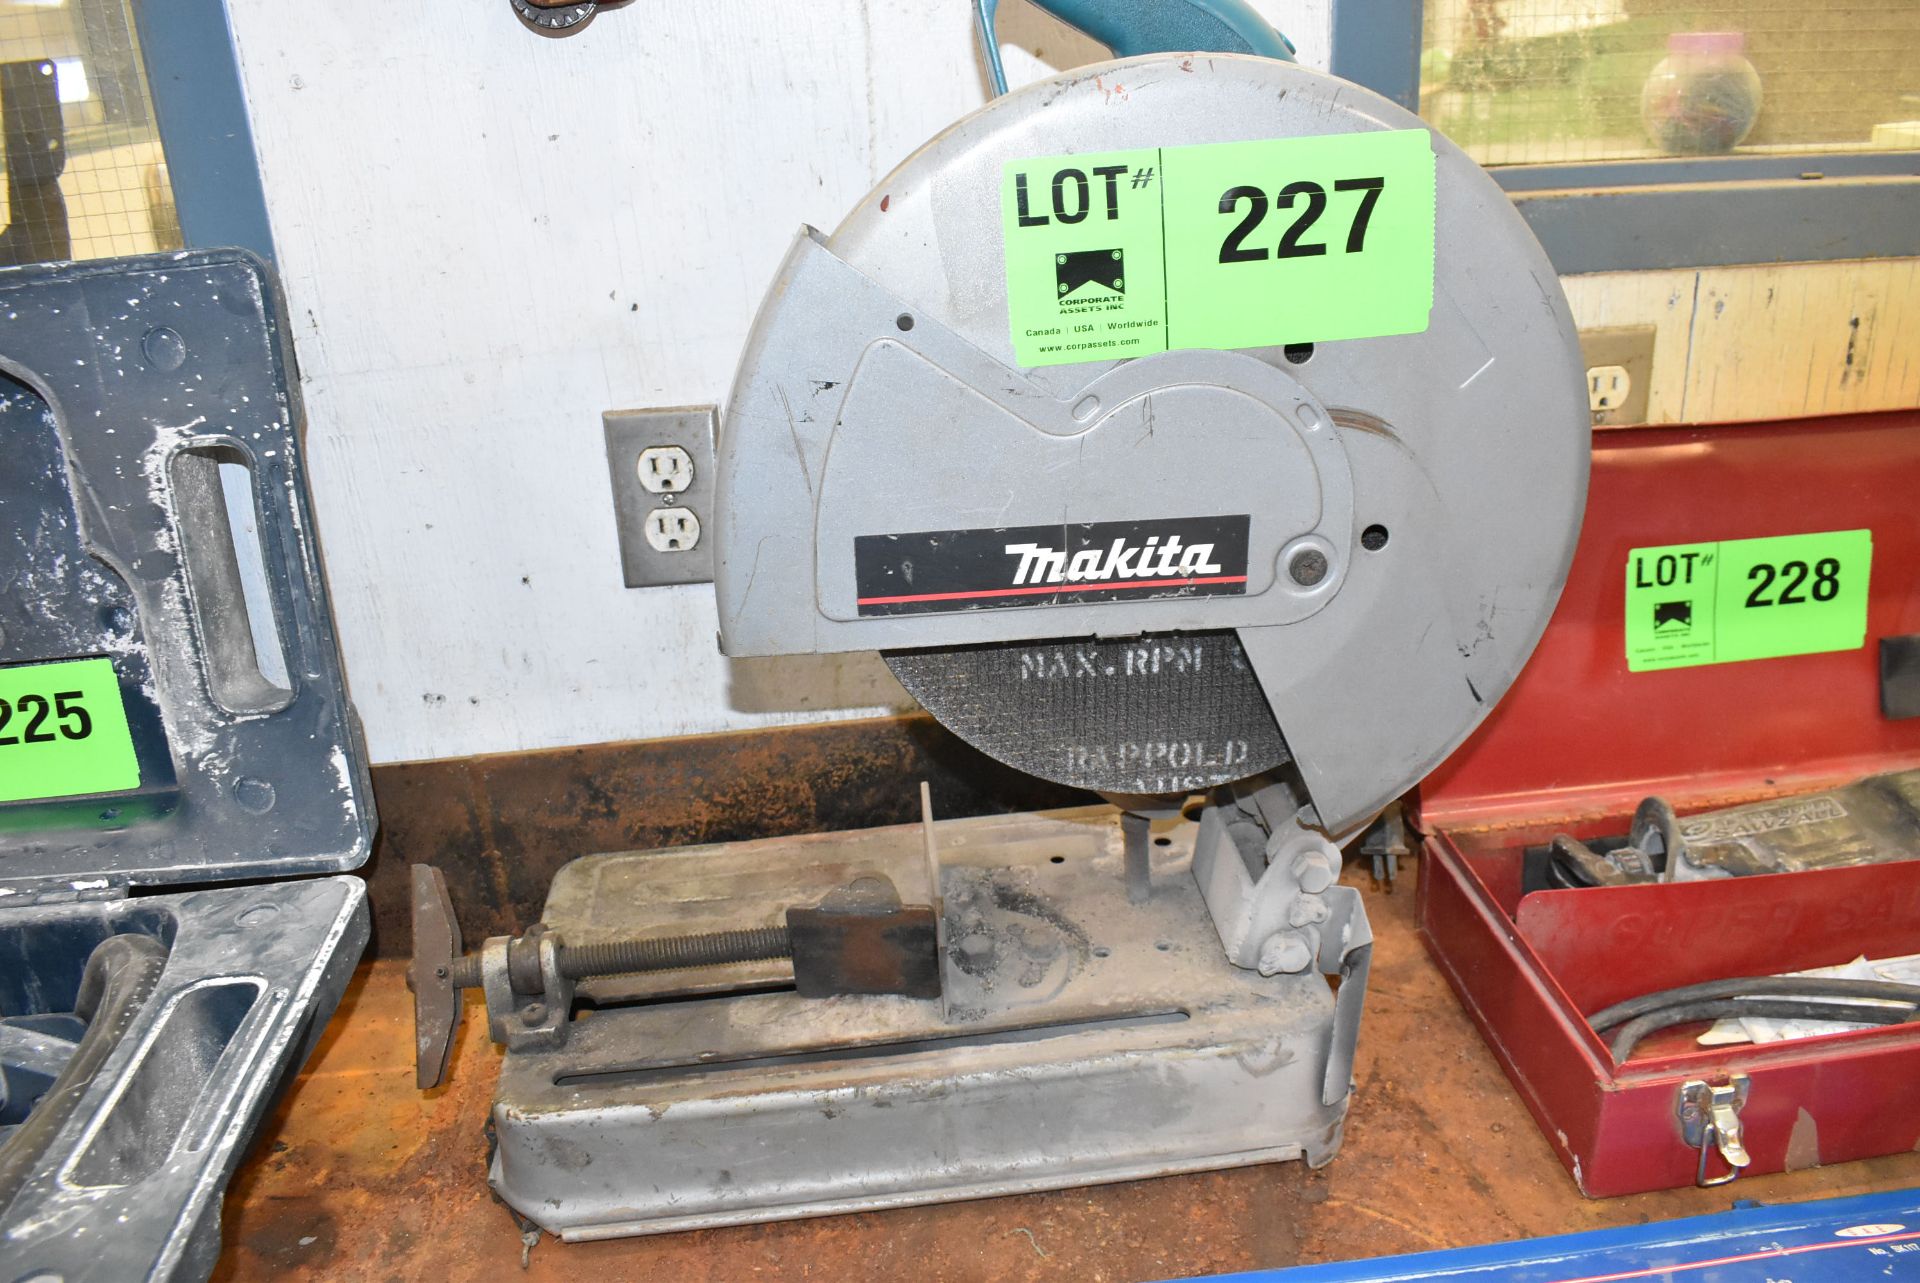 MAKITA ABRASIVE CUT OFF SAW [RIGGING FEE FOR LOT #227 - $20 CAD PLUS APPLICABLE TAXES]